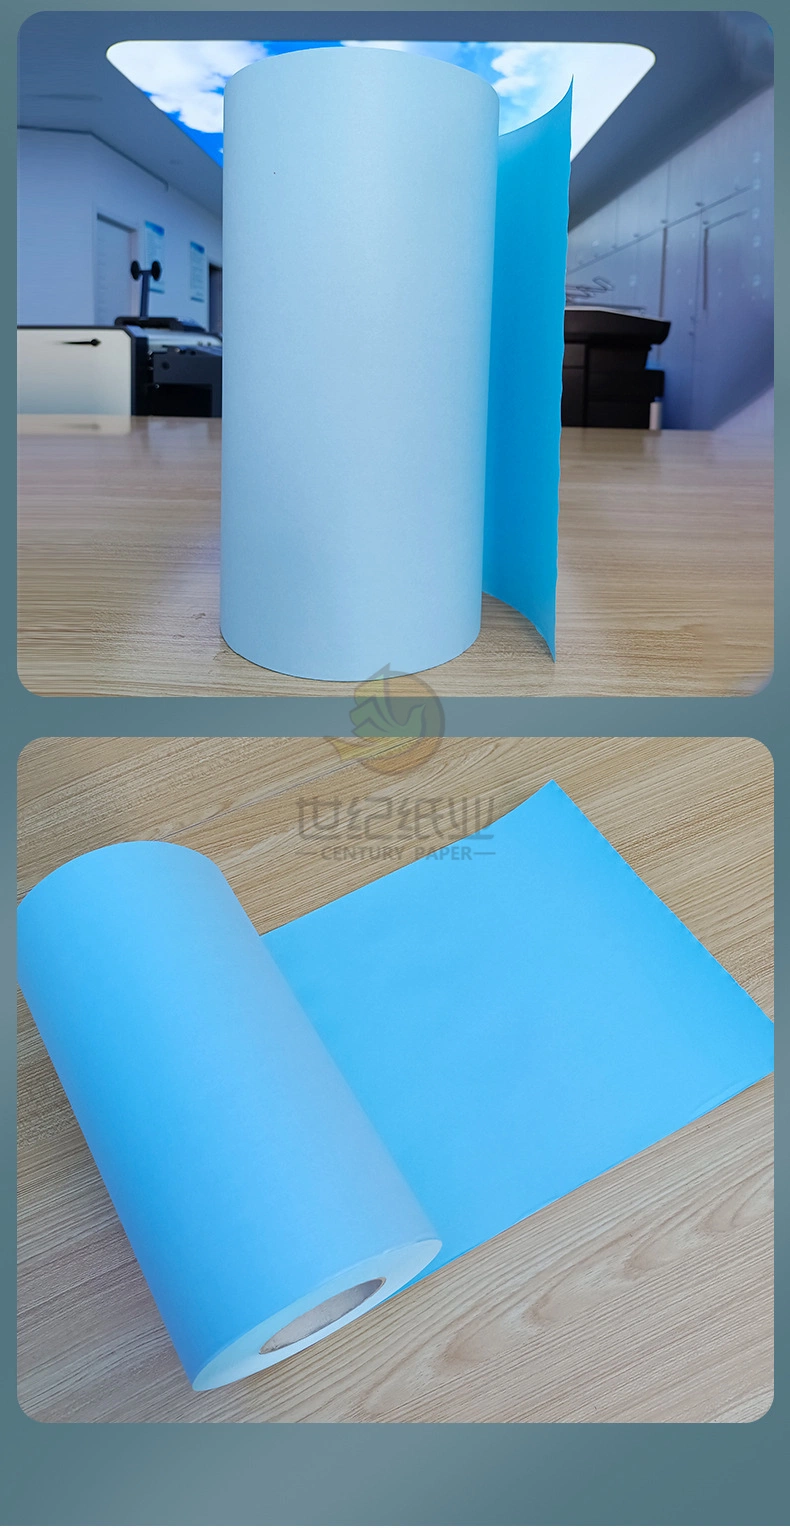 China Wholesale A0 A1 A2 A3 A4 Customize Size Roll 80g White CAD Bond/Plotter Marker Paper